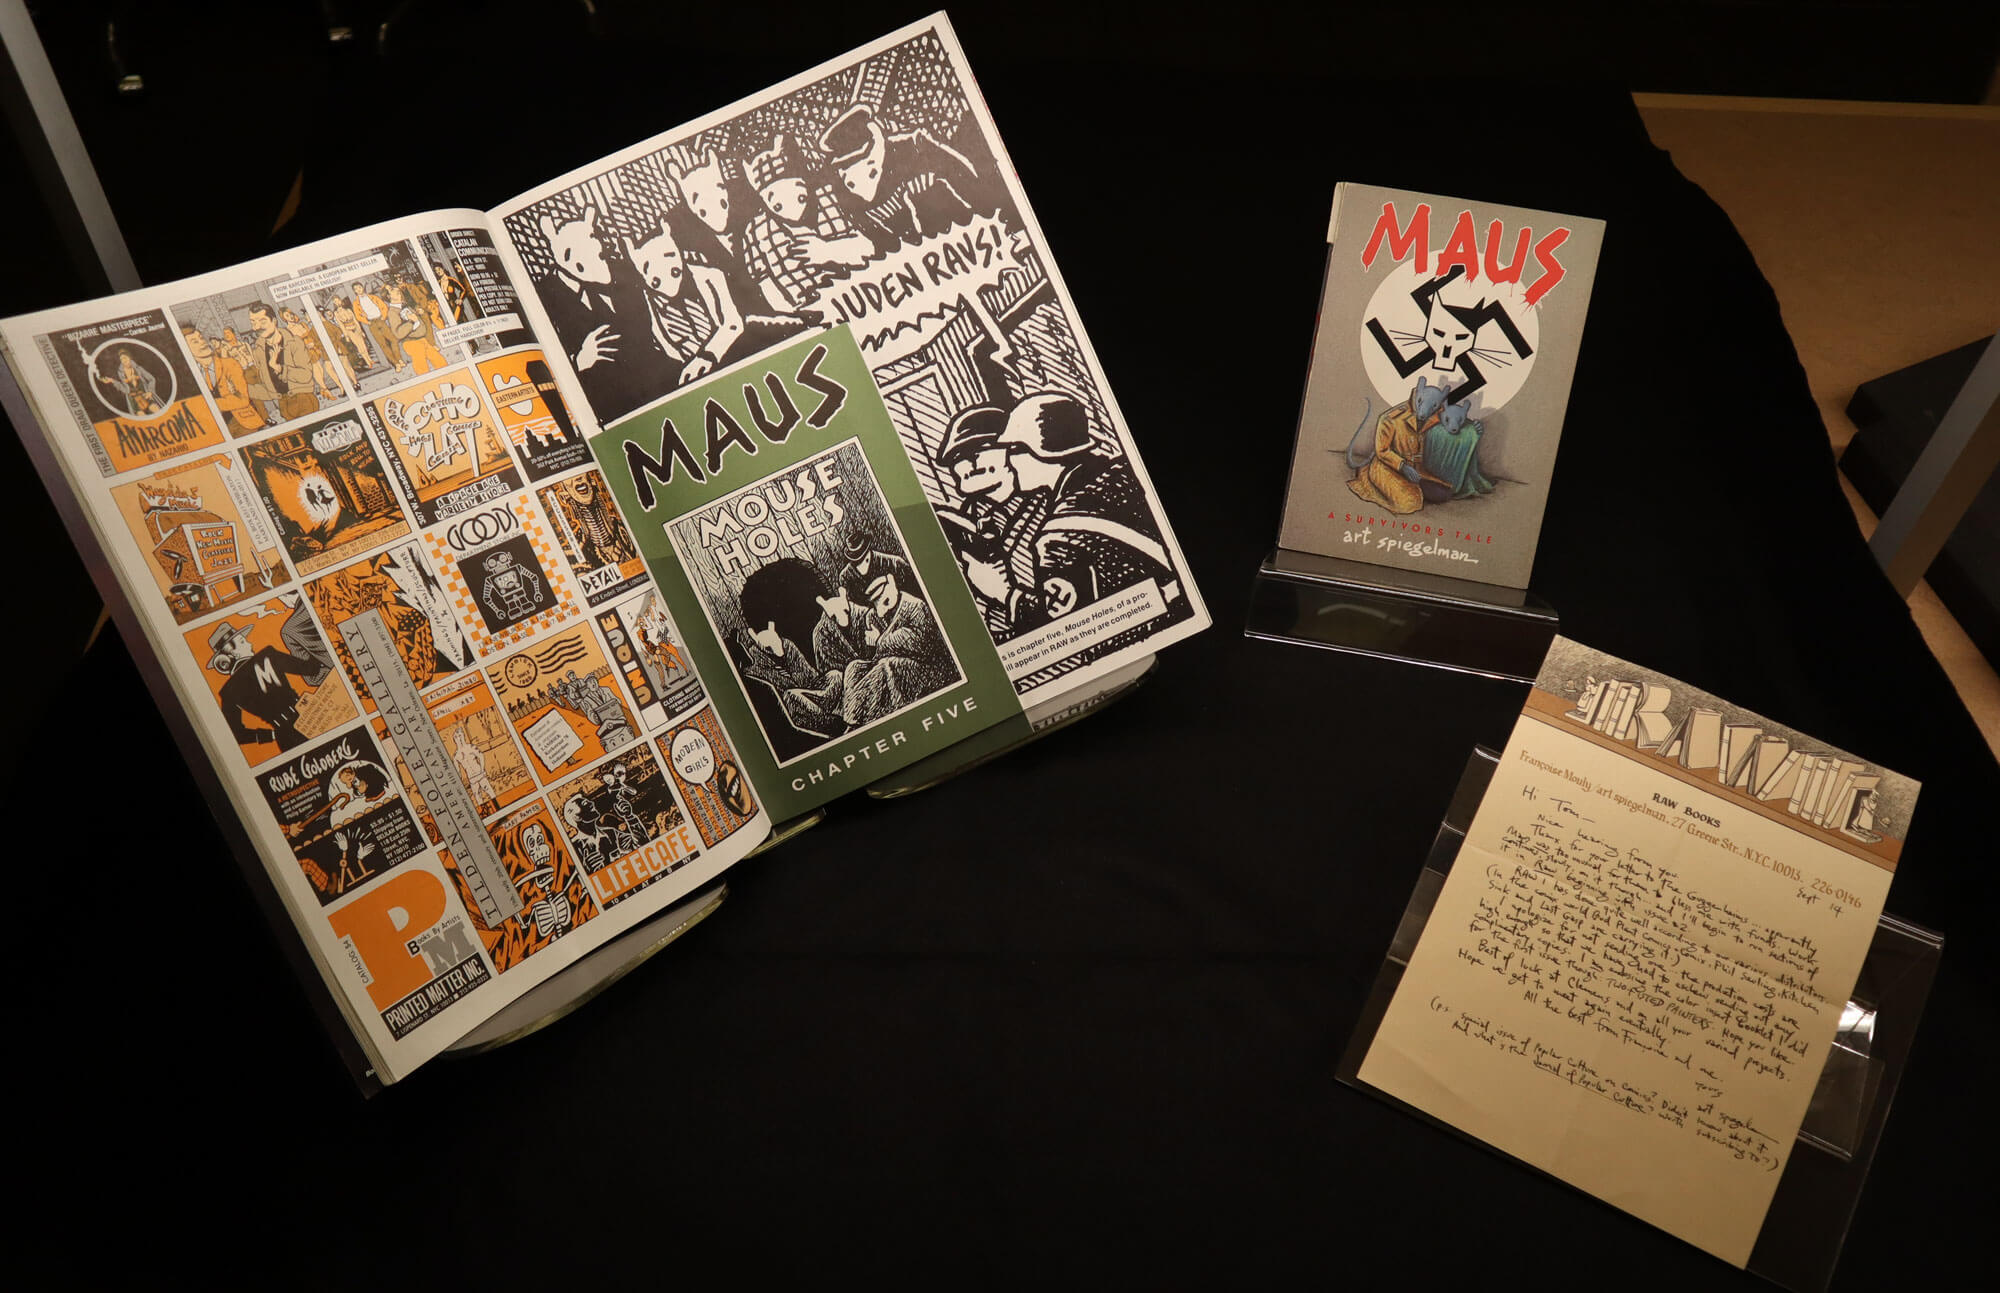 Copies of the Maus comic book